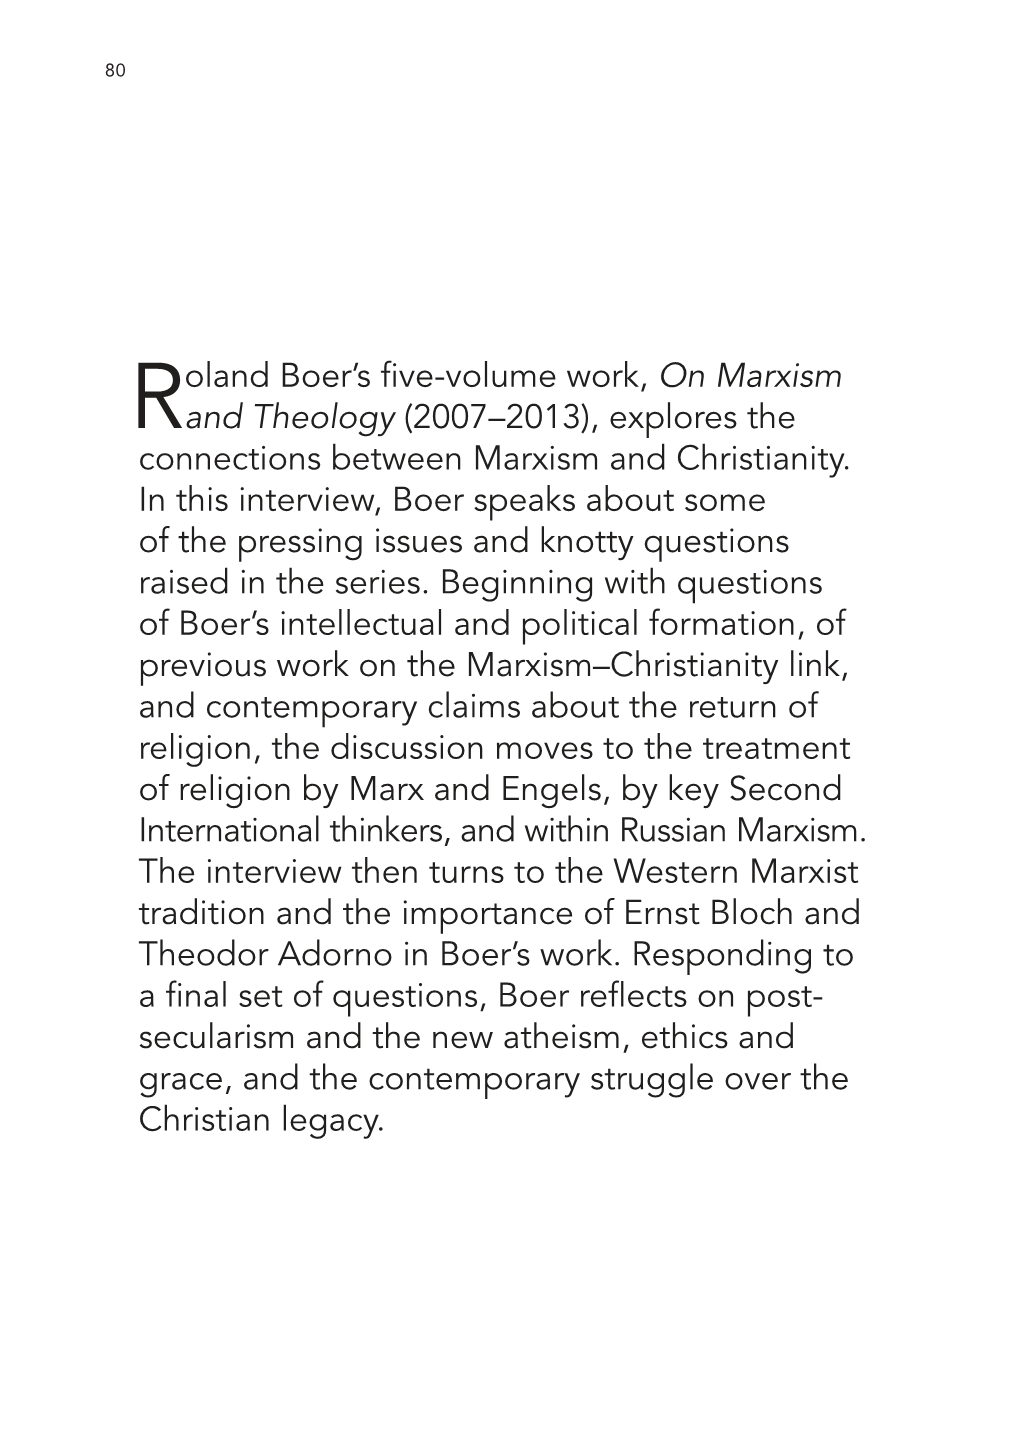 Roland Boer's Five-Volume Work, on Marxism and Theology